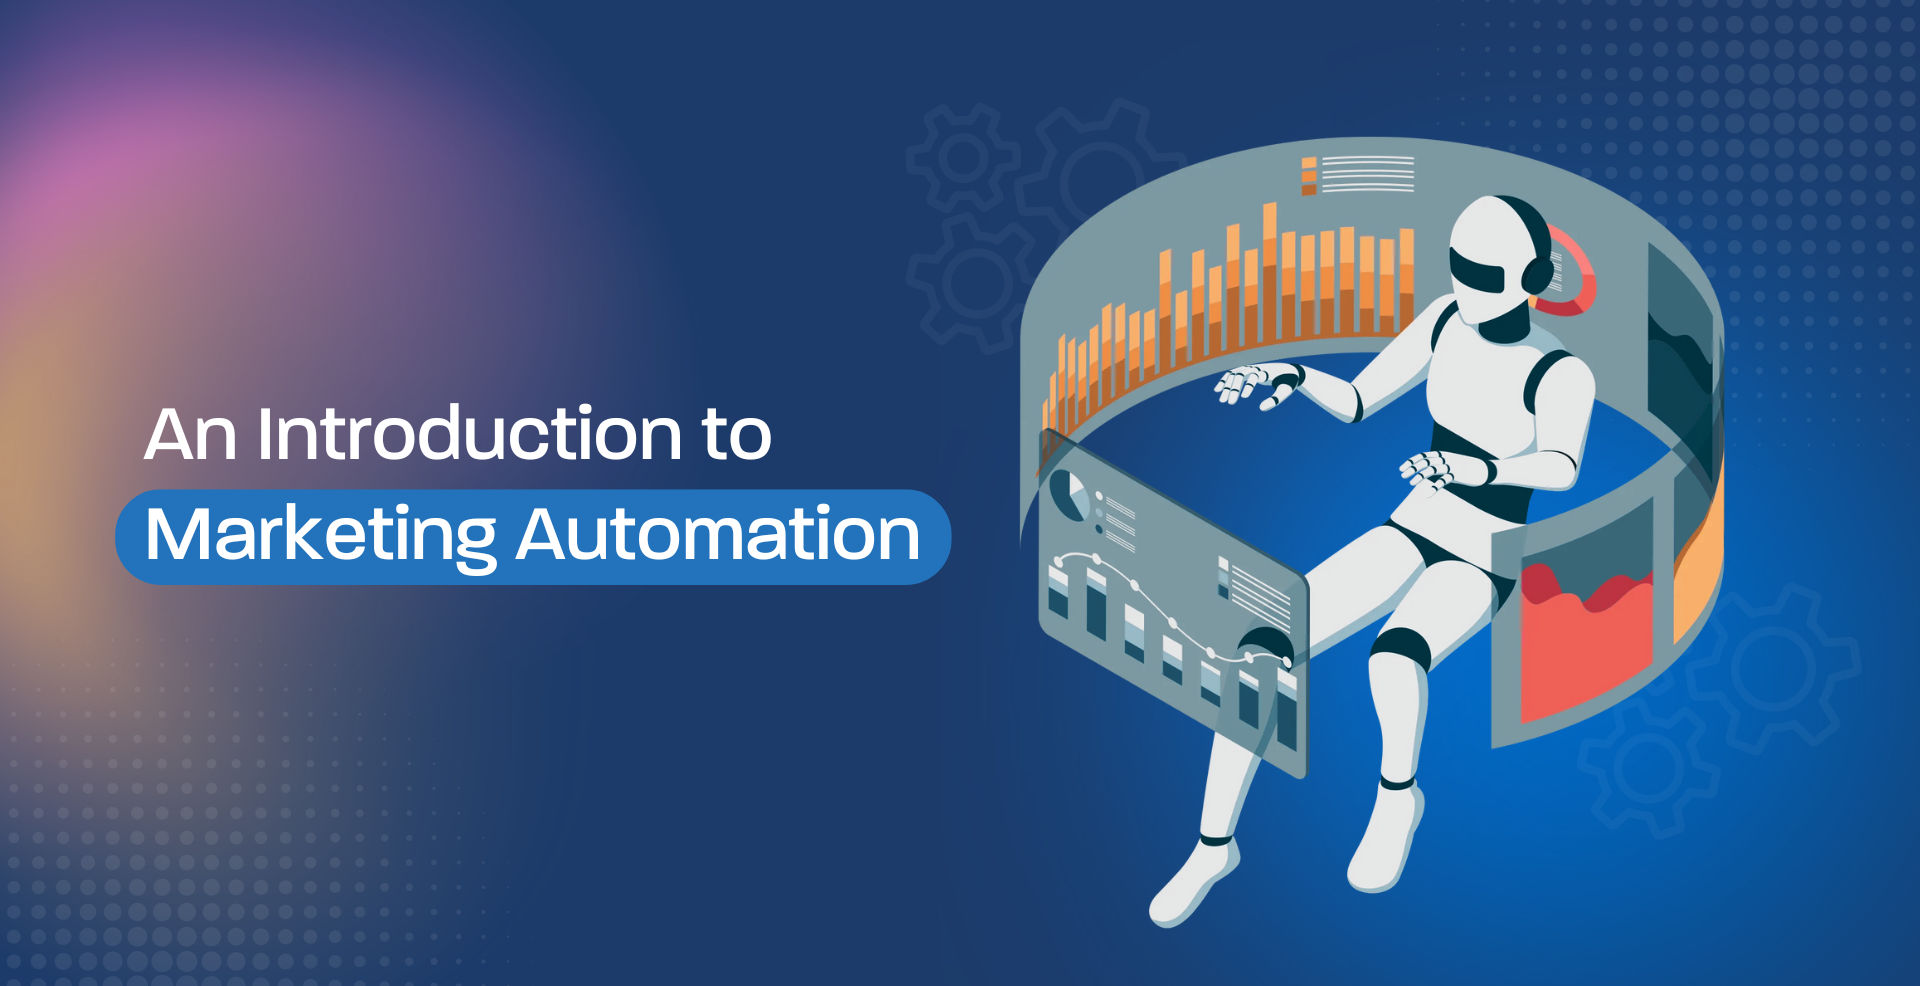 An Introduction to Marketing Automation